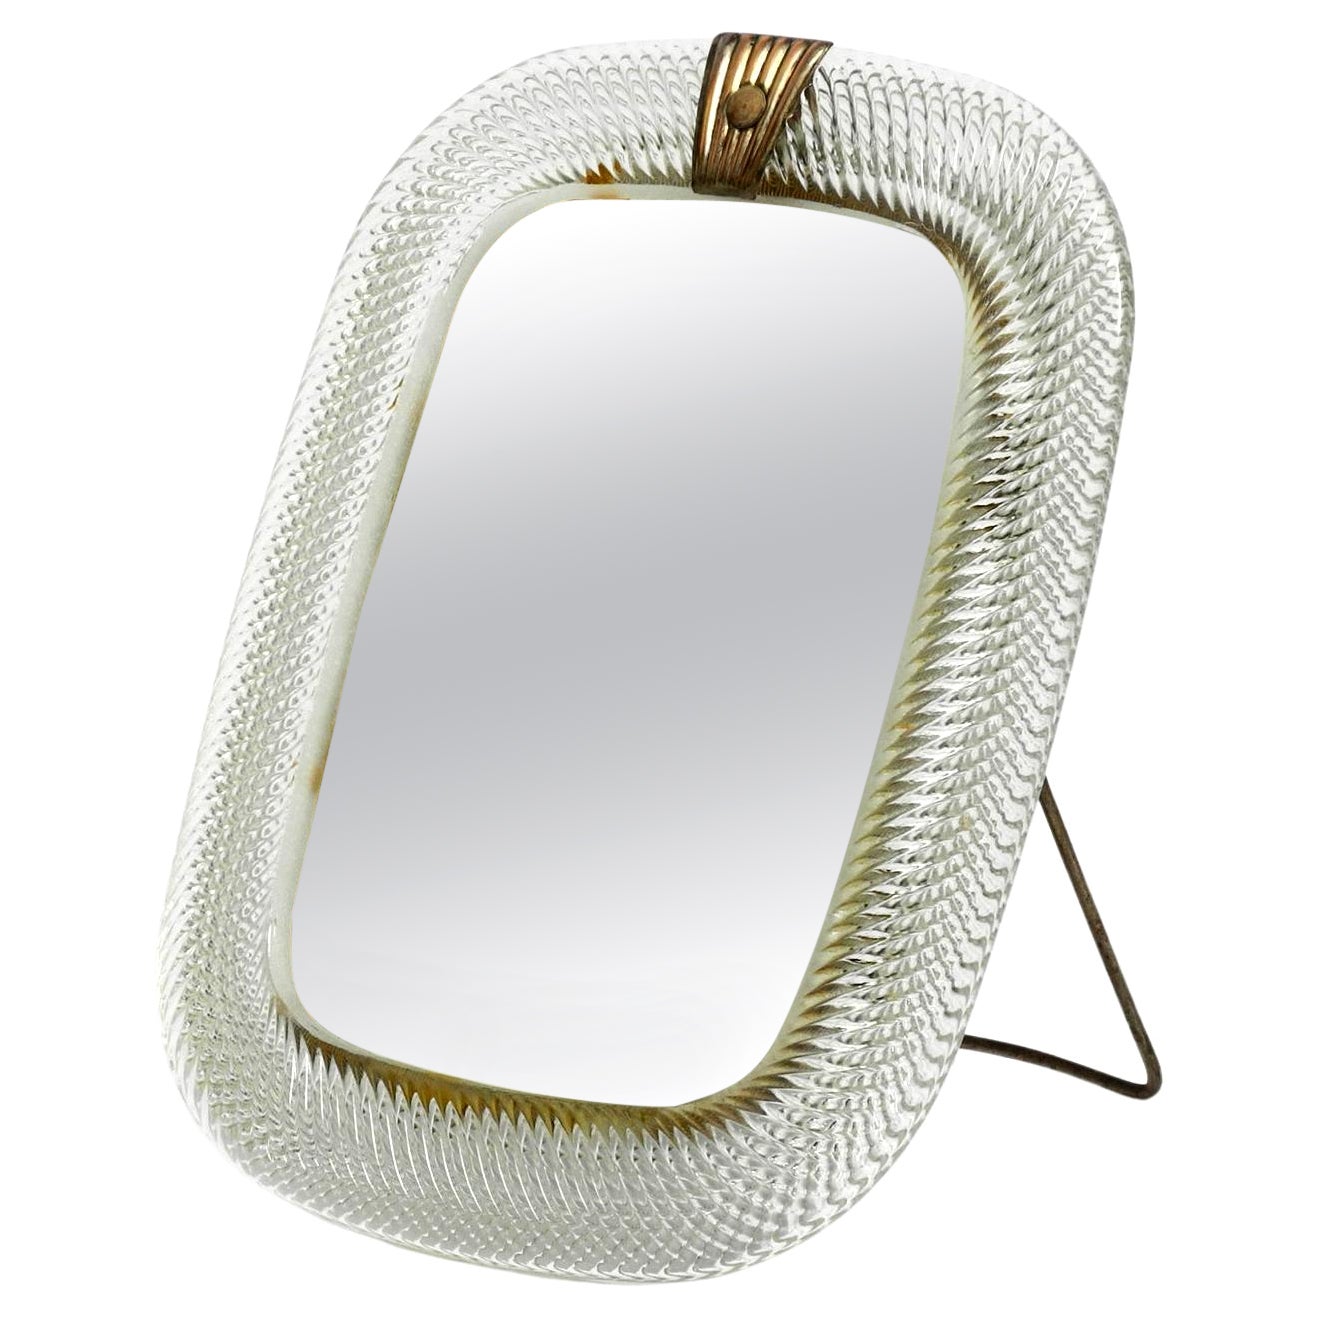 1960s Table and Wall Mirror with a Heavy Murano Glass Frame by Barovier & Toso